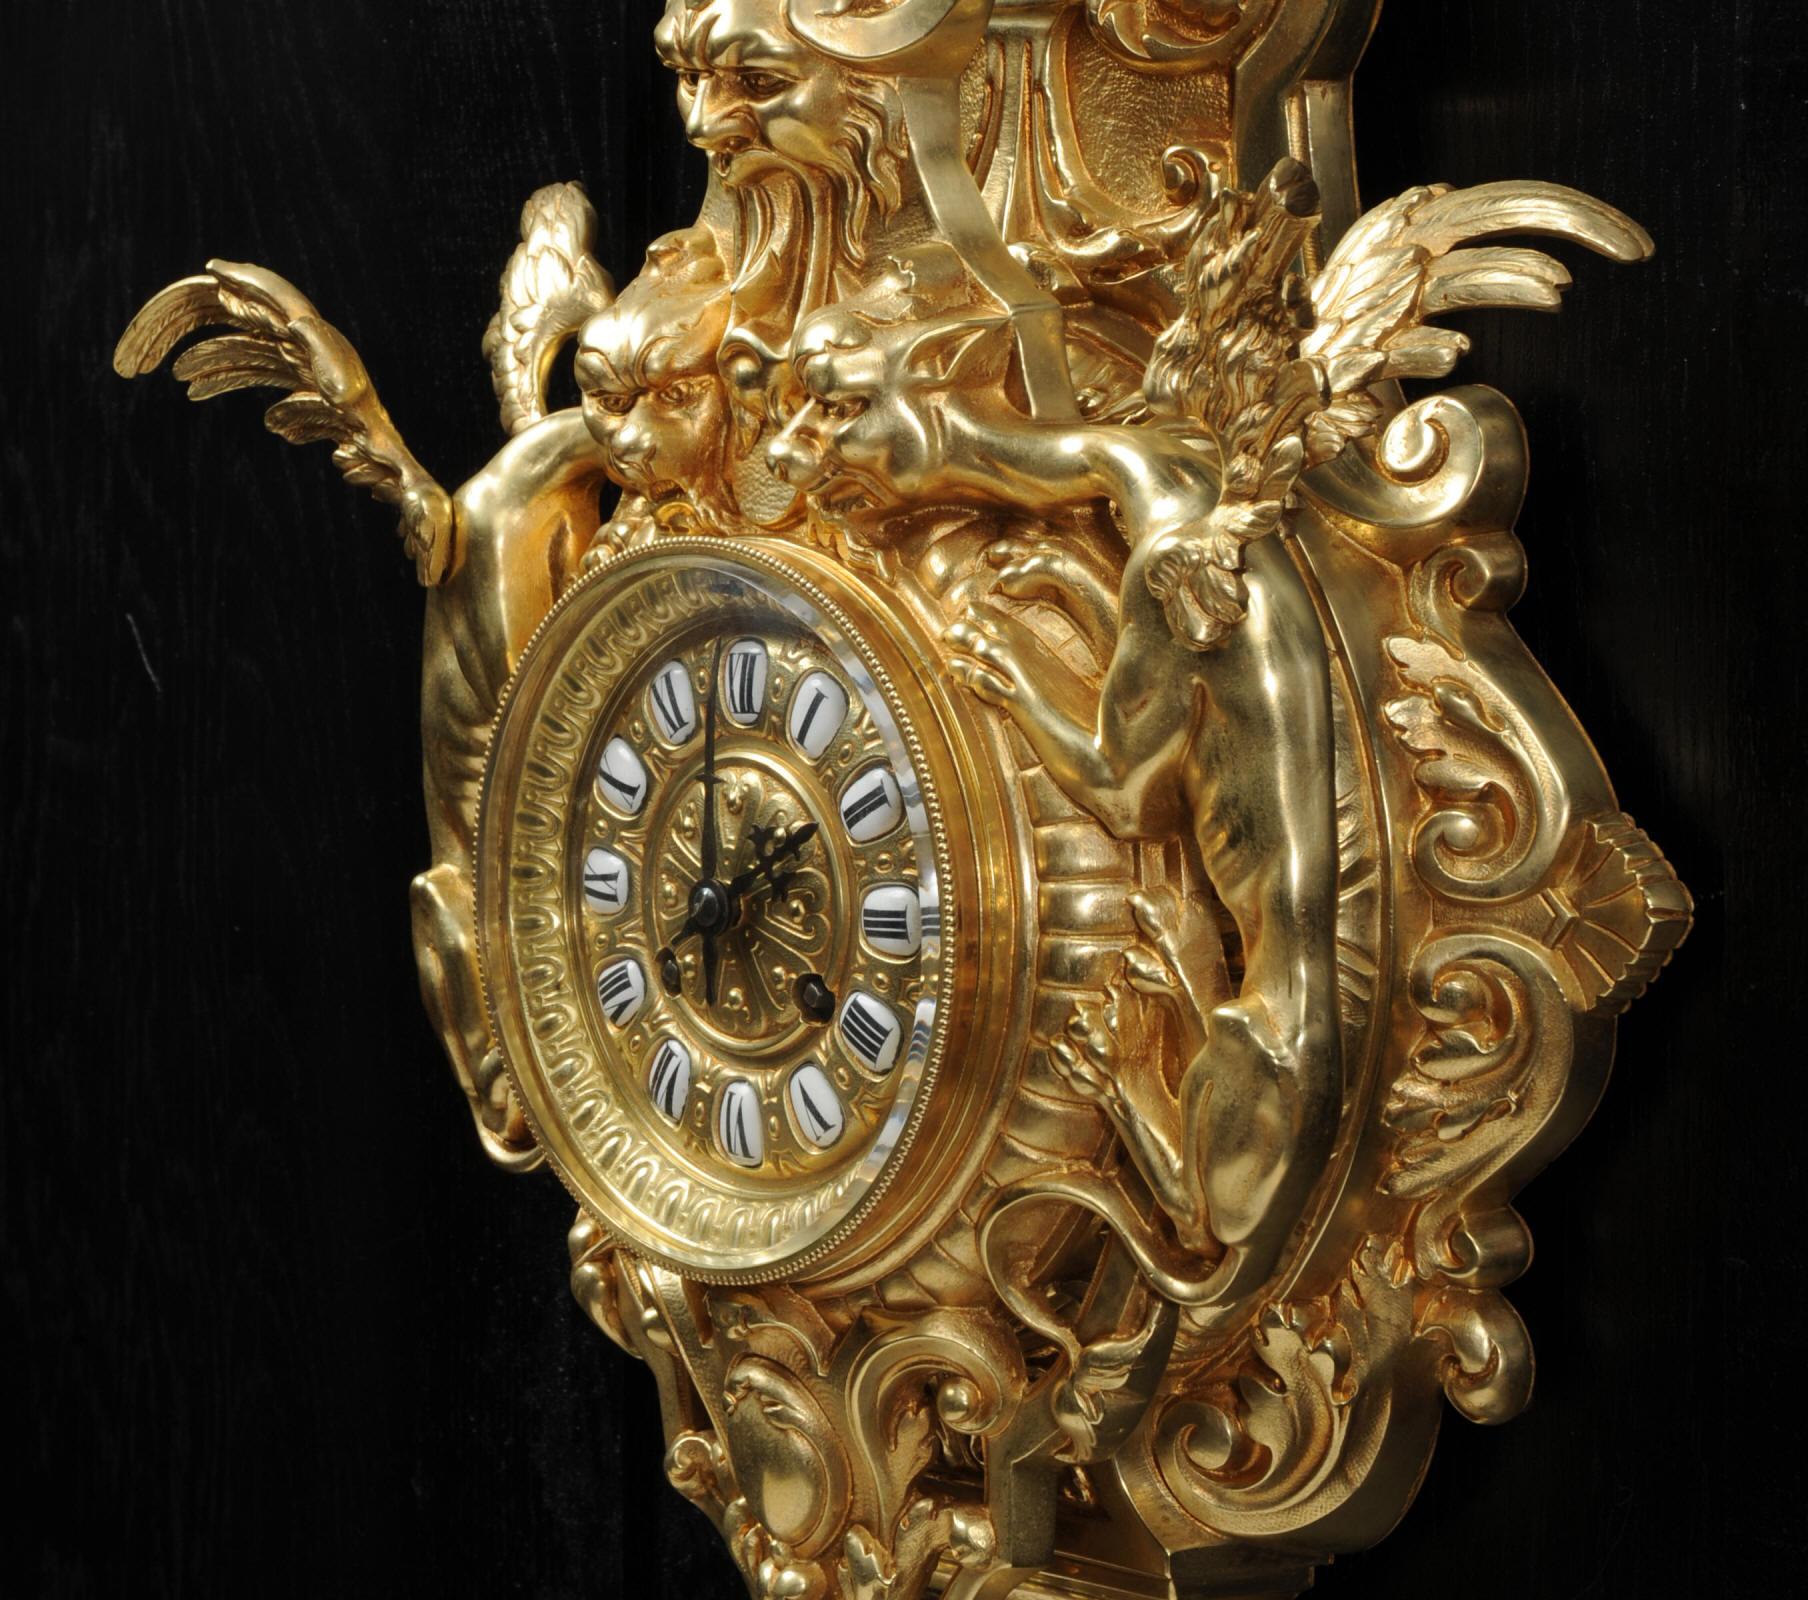 19th Century Hounds of the Devil, Antique French Gothic Gilt Bronze Cartel Wall Clock